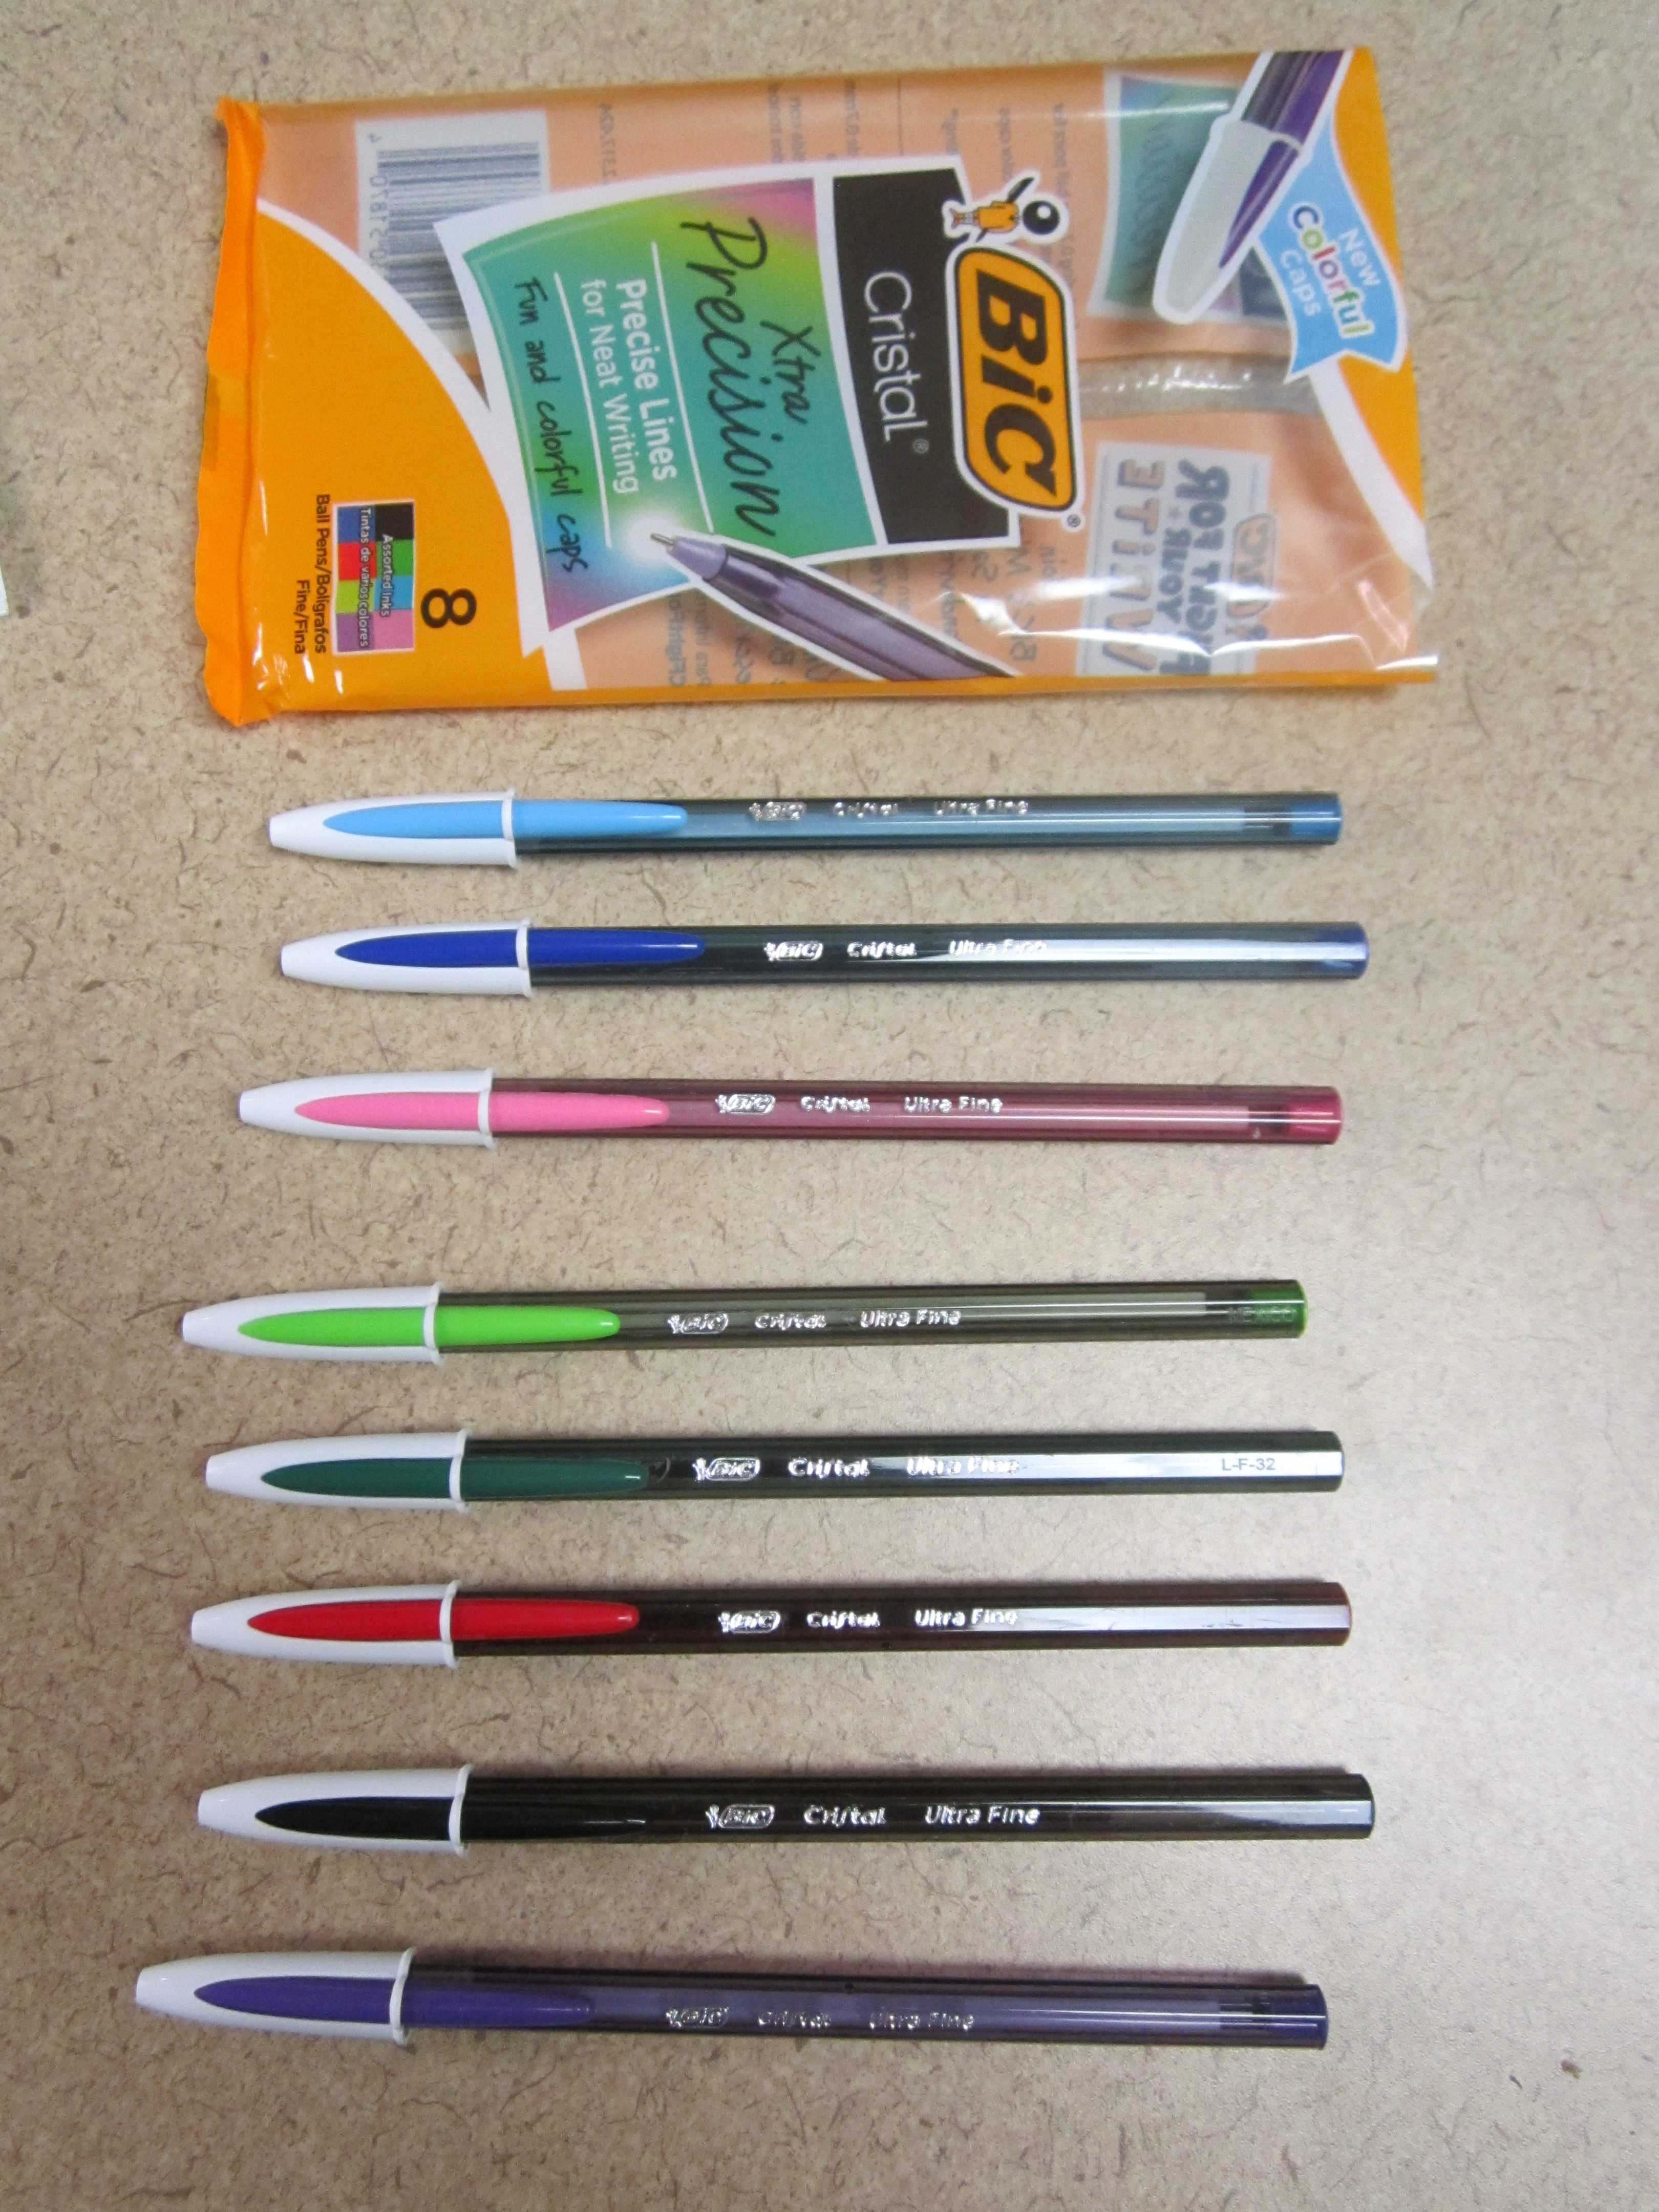 Bic Cristal Xtra Bold Pens 8-Count Package